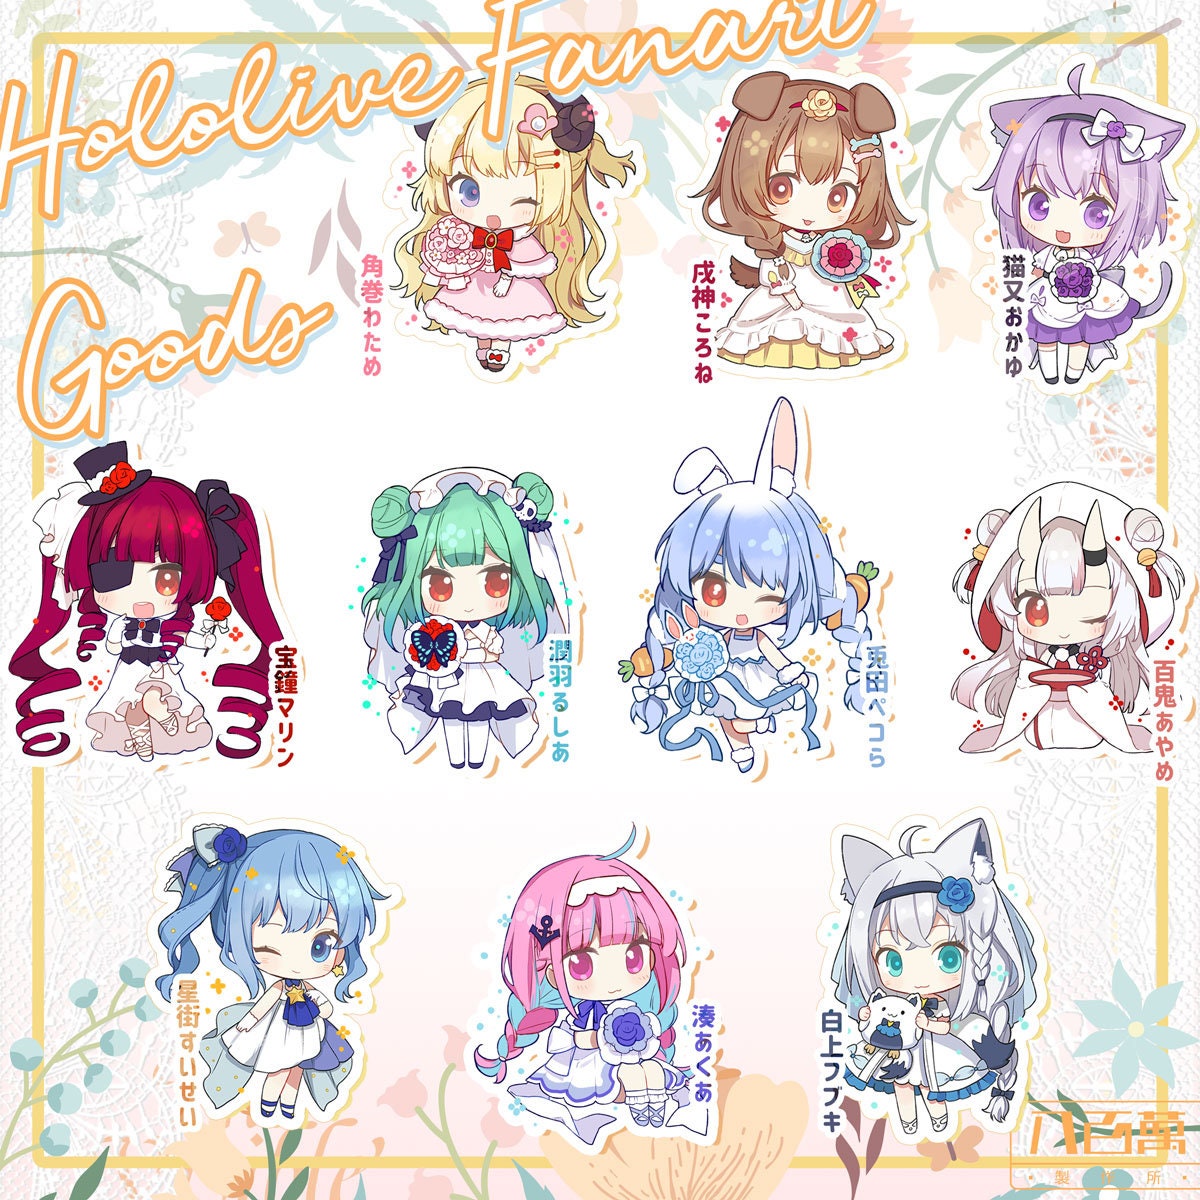 Ceres Fauna - Hololive Fan Wiki